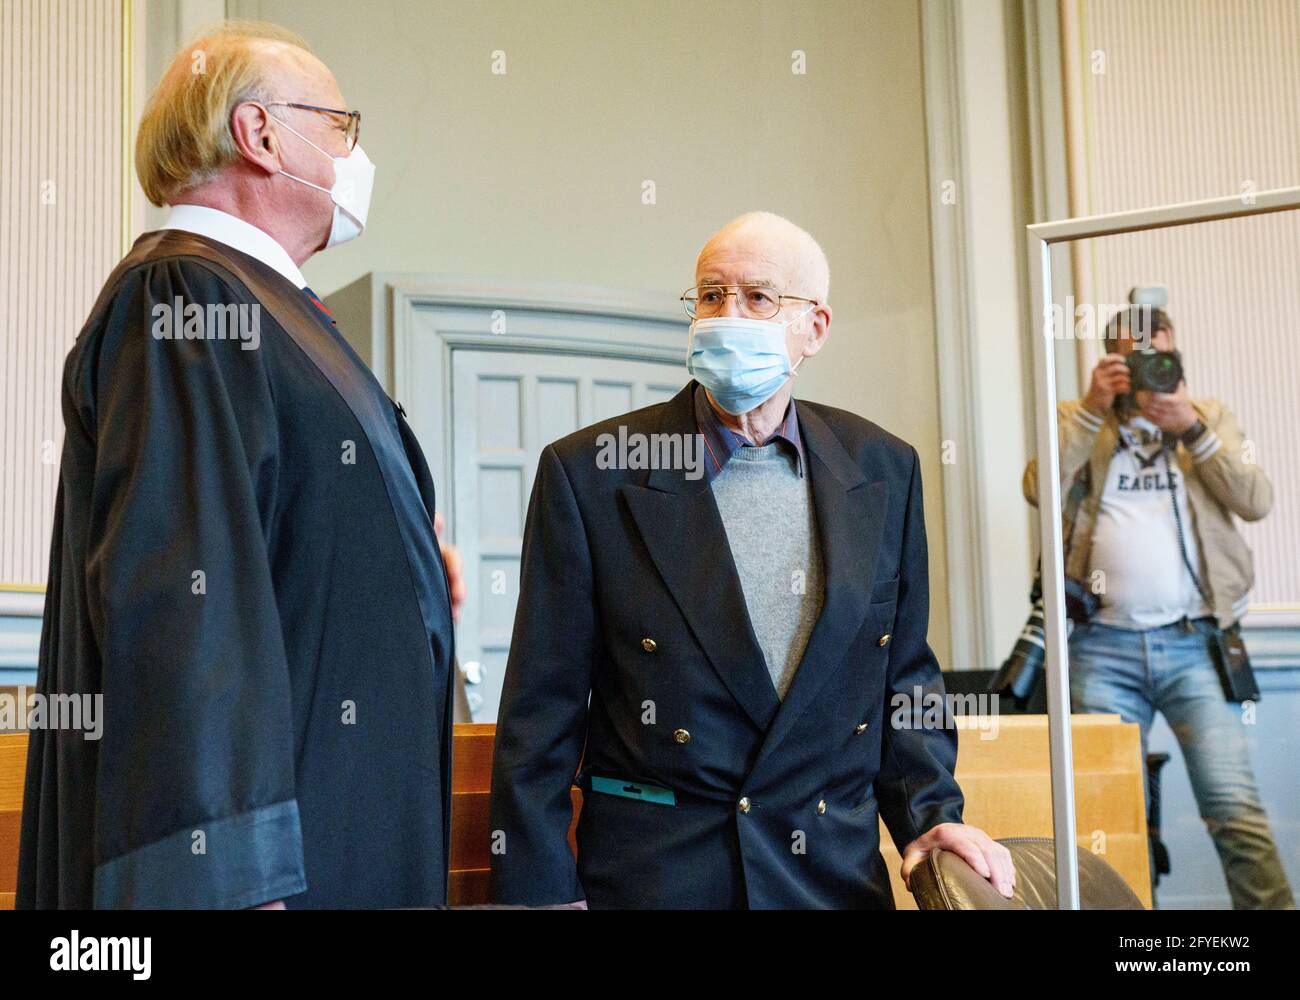 Kiel, Germany. 28th May, 2021. The 84-year-old accused of possession of a tank (M) and his lawyer Gerald Goecke (l), wait in the courtroom for the start of the trial. The accused from Heikendorf is said to have been in unauthorized possession of an old battle tank of the type 'Panther' from the Second World War, a torpedo, a mortar of 5 cm caliber as well as an anti-aircraft gun of 8.8 cm caliber until they were seized in 2015. Credit: Axel Heimken/dpa/Alamy Live News Stock Photo